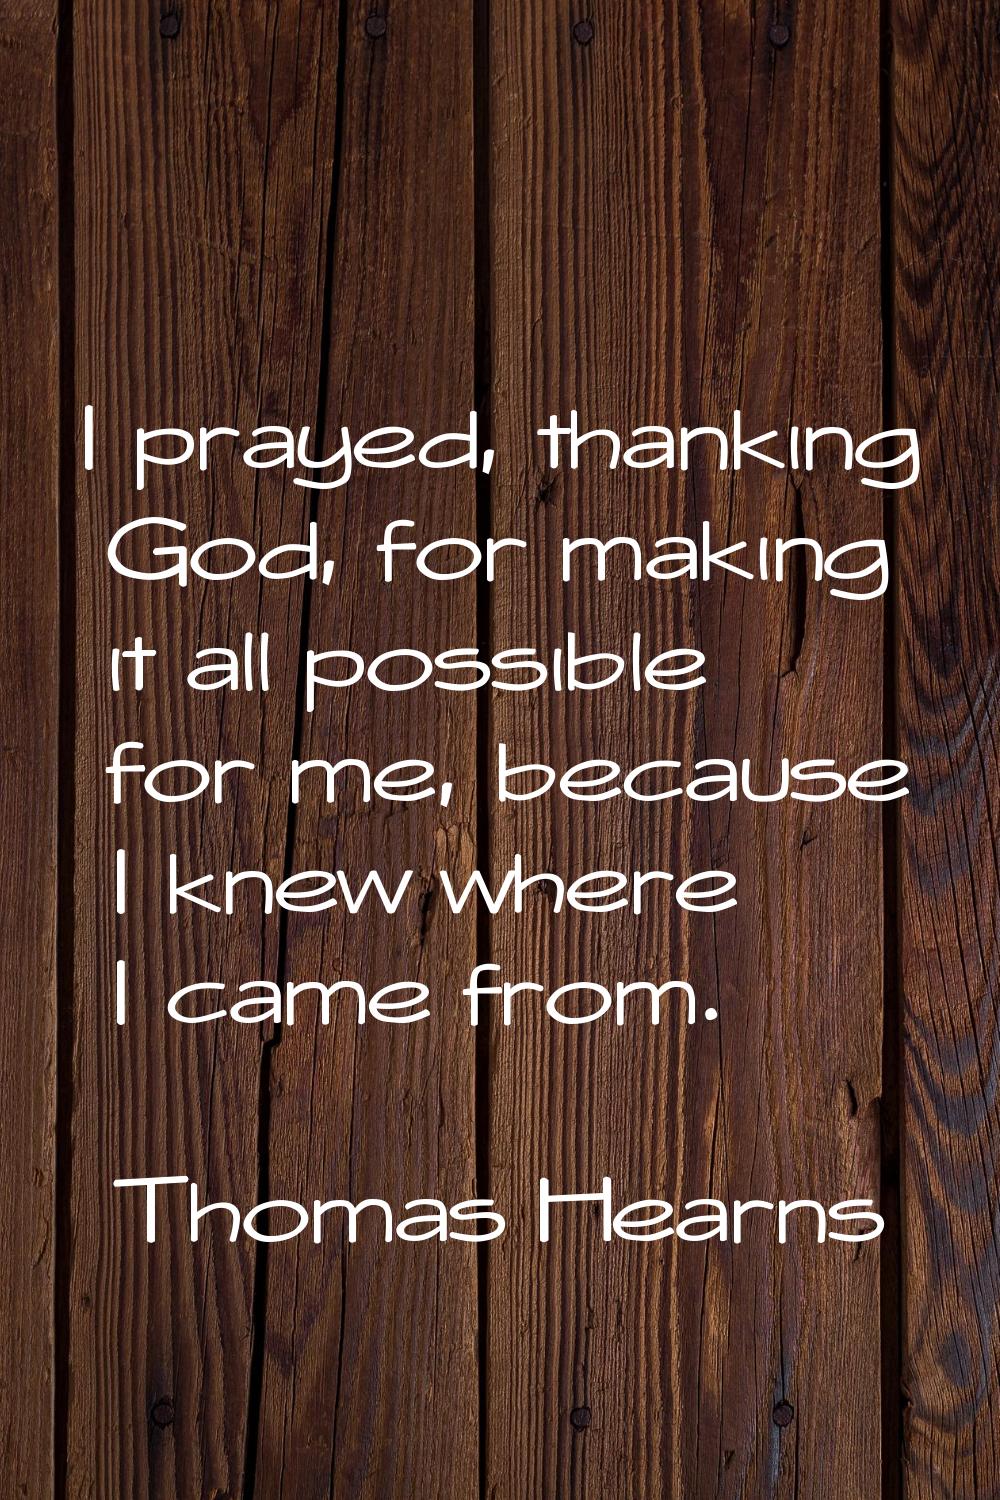 I prayed, thanking God, for making it all possible for me, because I knew where I came from.